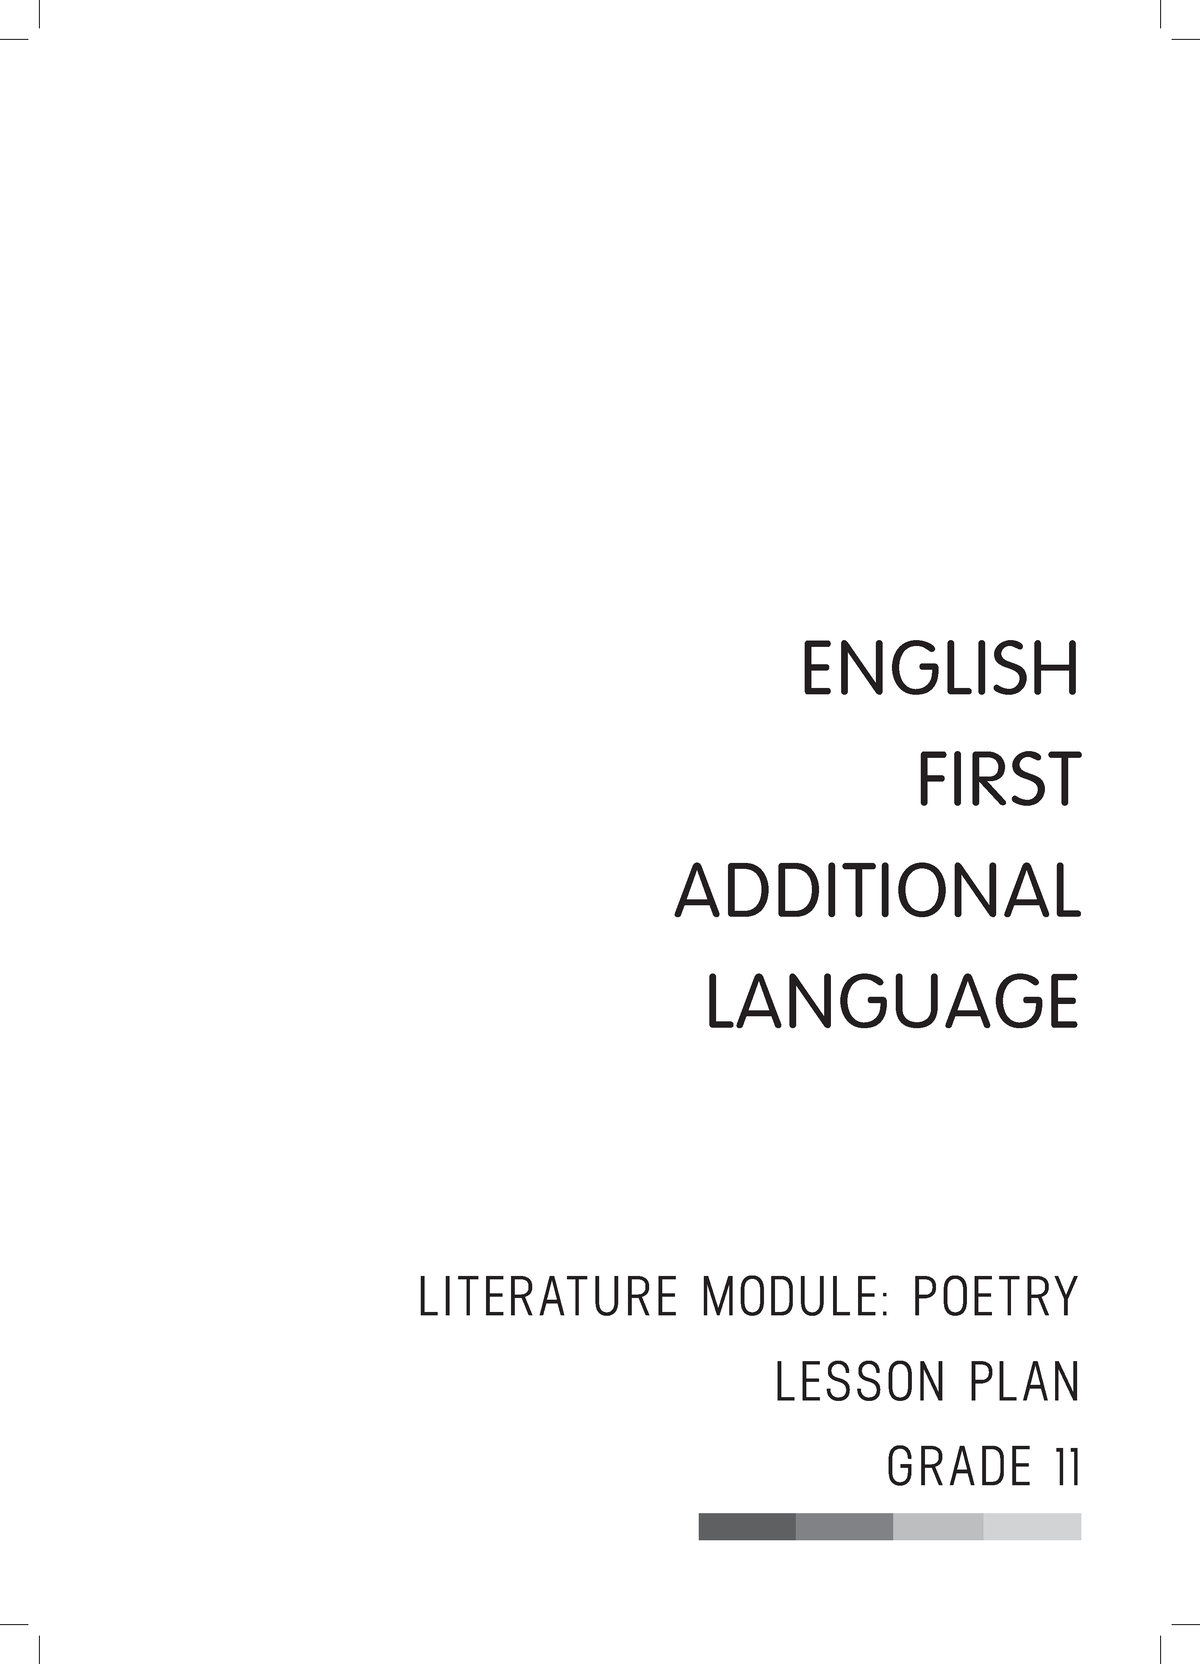 Poetry Lesson Plan English First Additional Language Literature Module Poetry Lesson Plan 6528